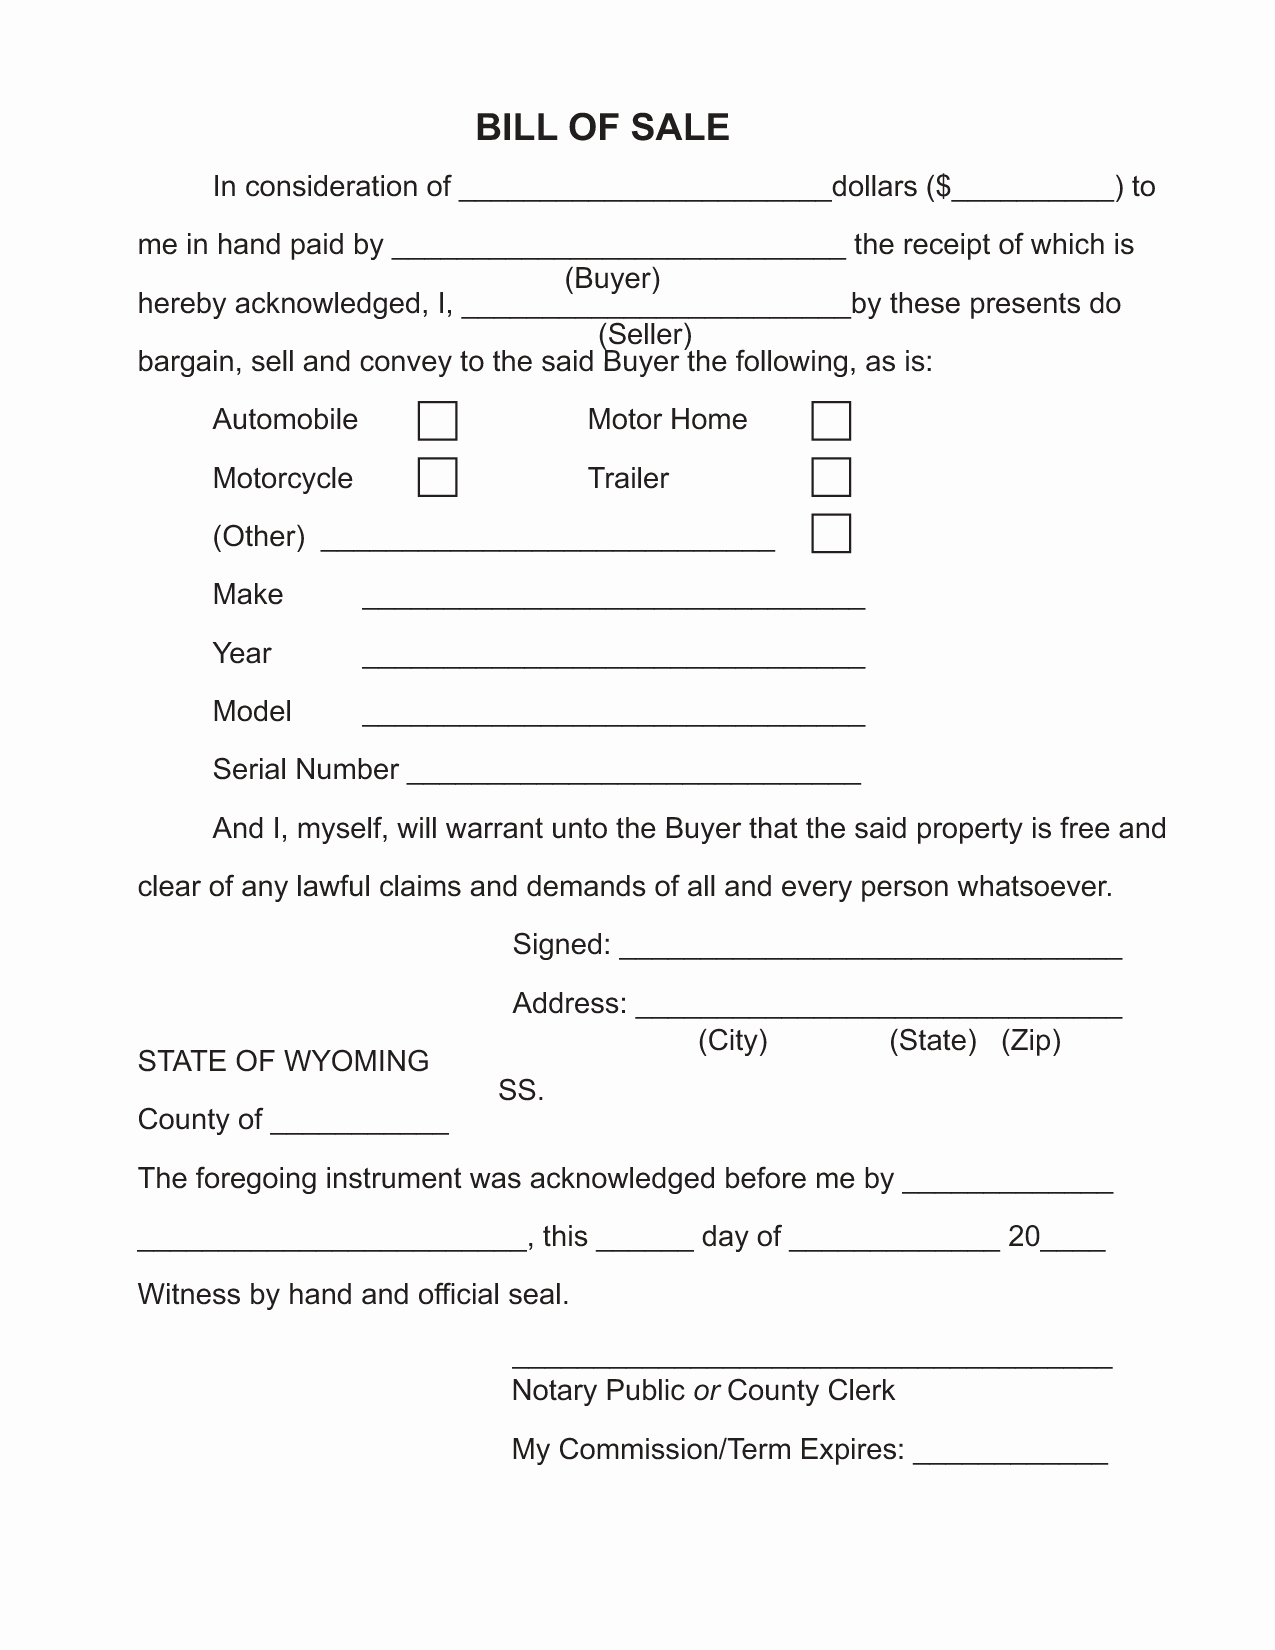 Bill Of Sale Trailer Lovely Free Printable Bill Of Sale Camper form Generic